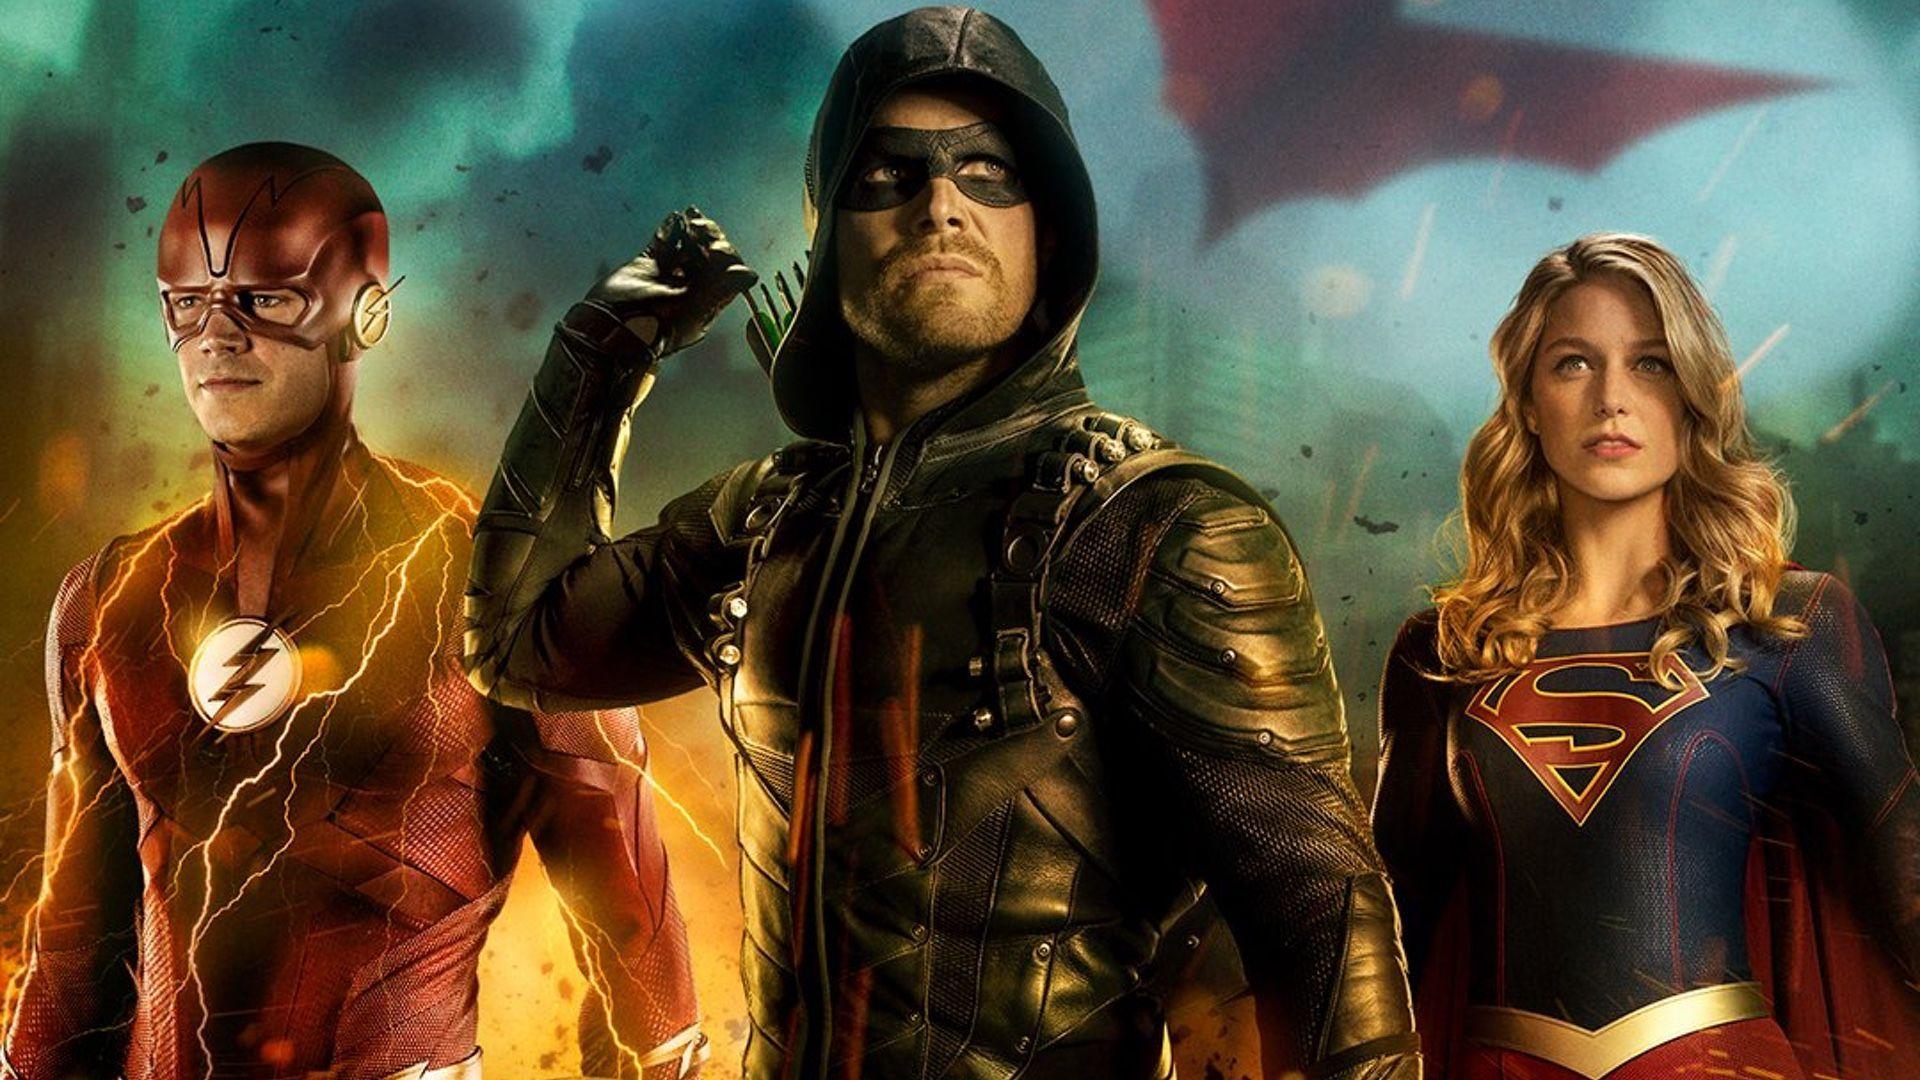 Arrowverse crossover titled 'Elseworlds'; will have ties to Crisis